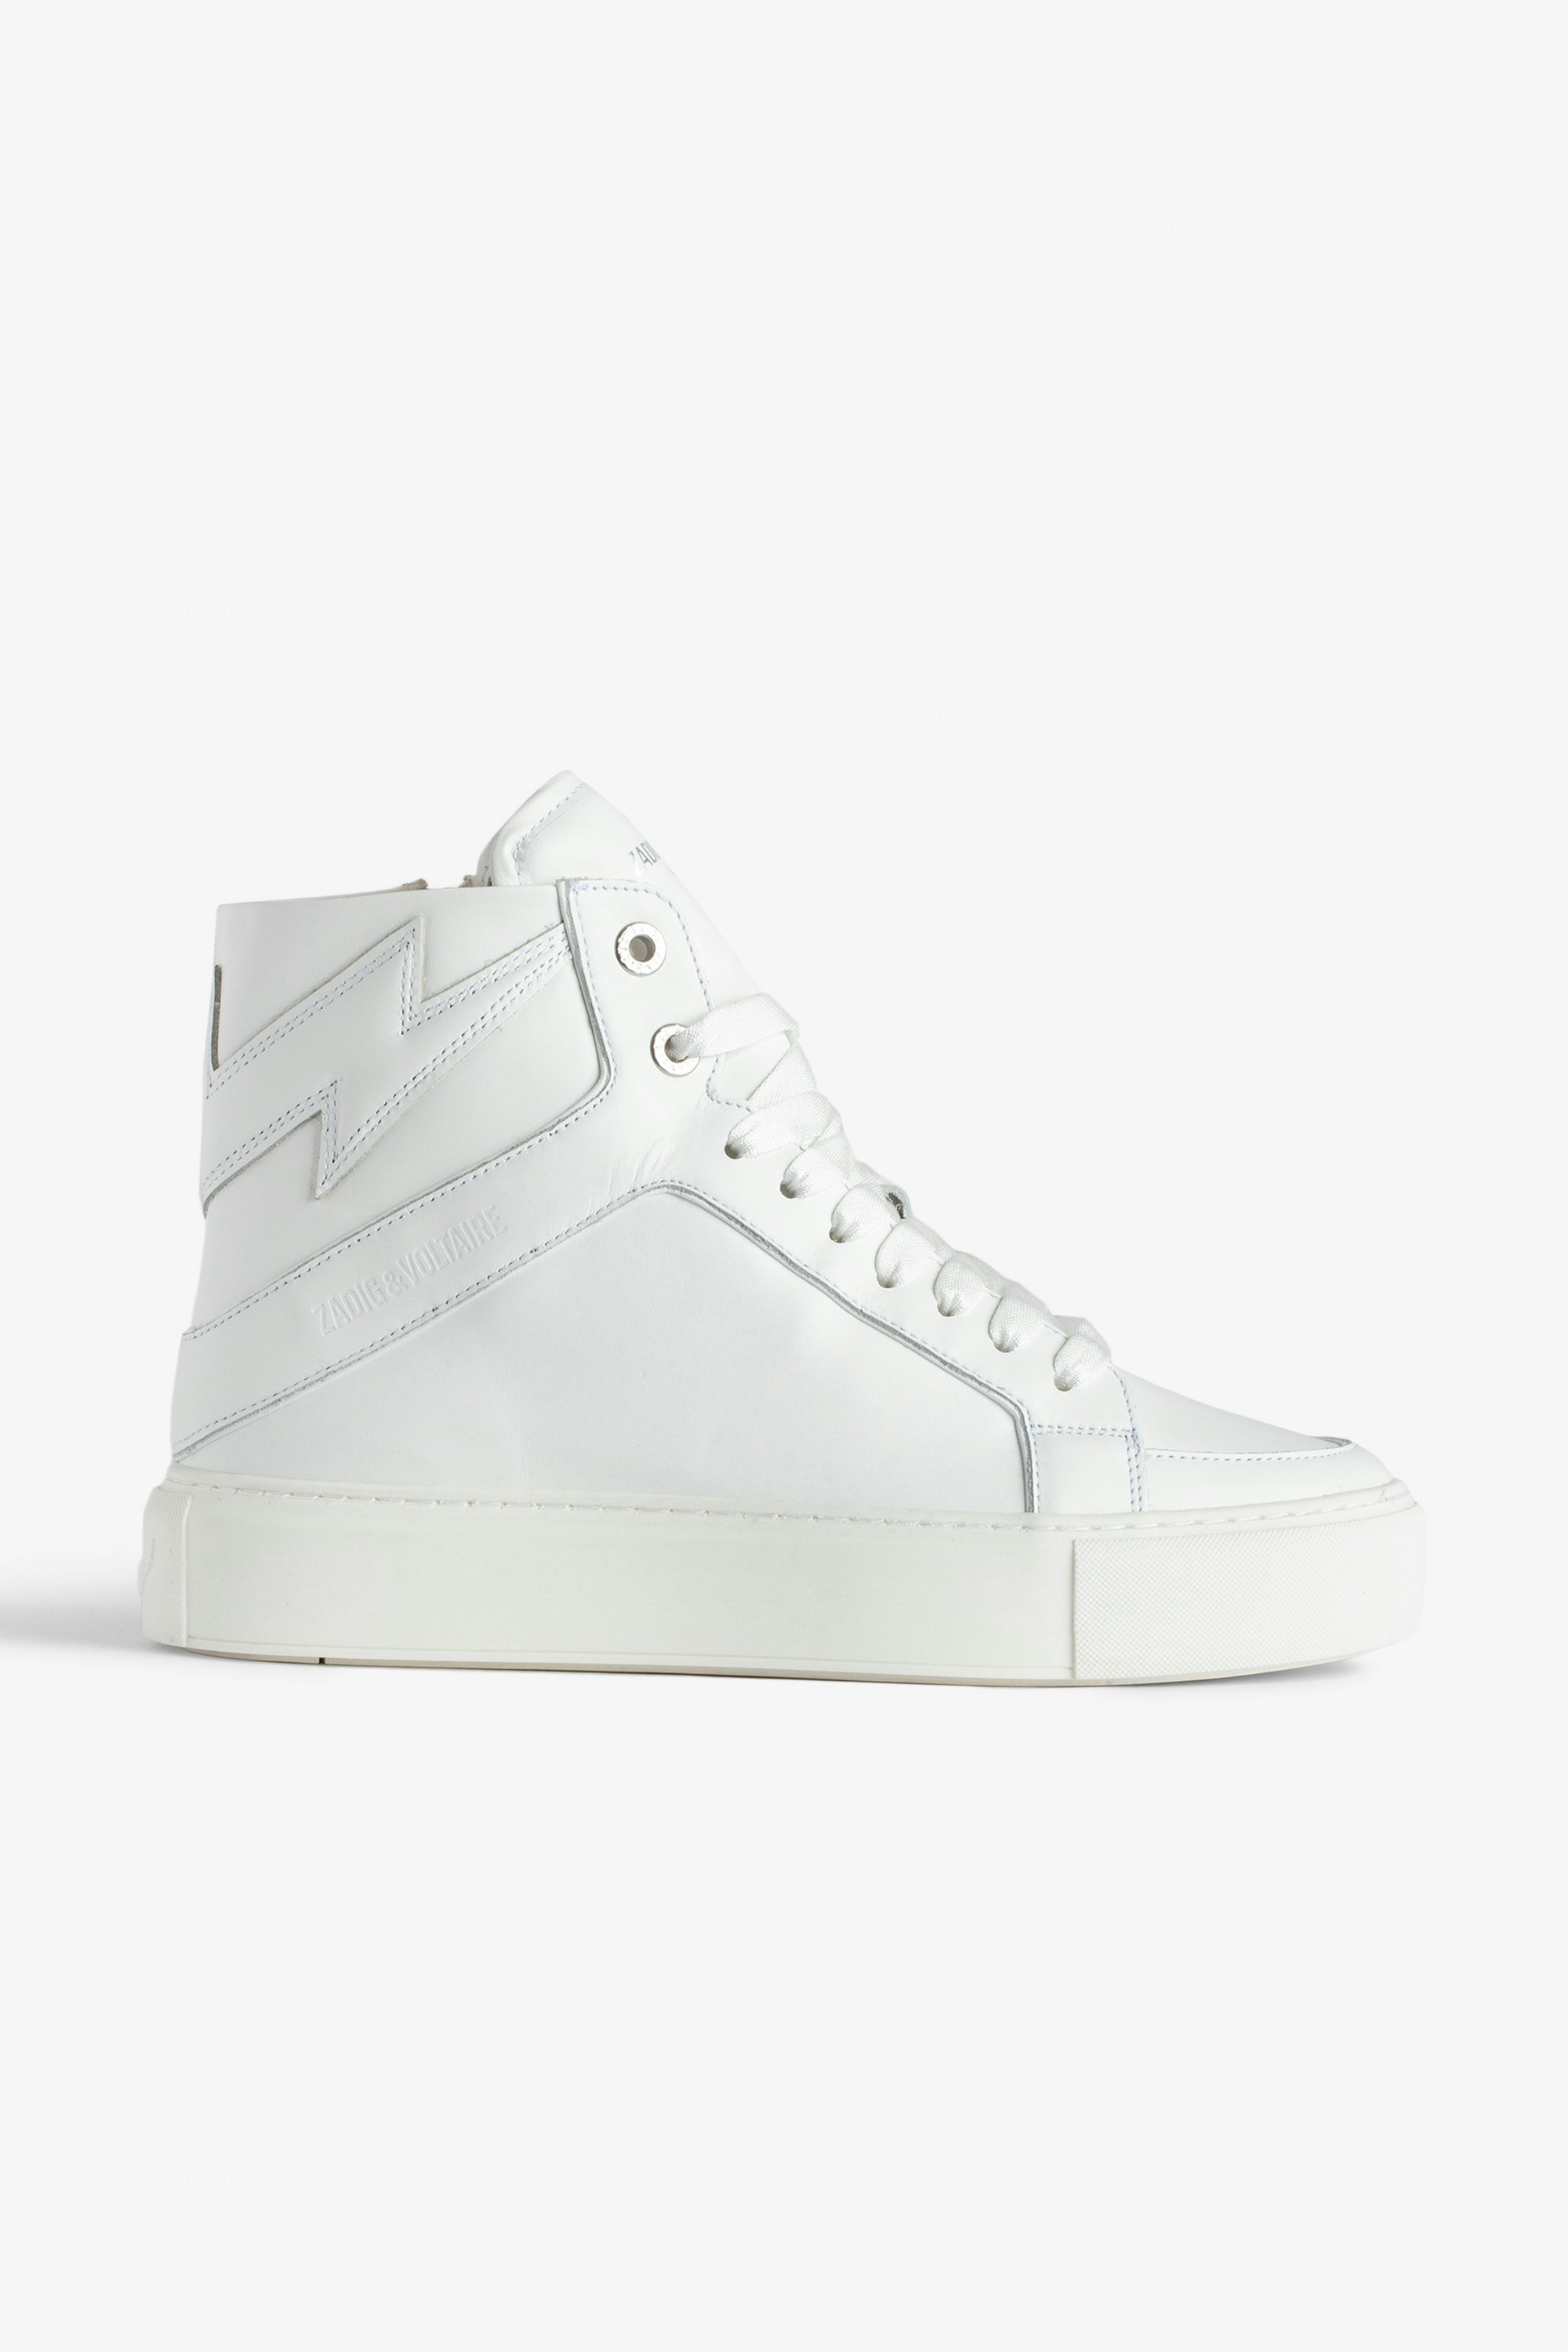 ZV1747 High Flash High-Top Platform Trainers - Women’s white smooth leather high-top trainers with lightning bolt panels and chunky sole.